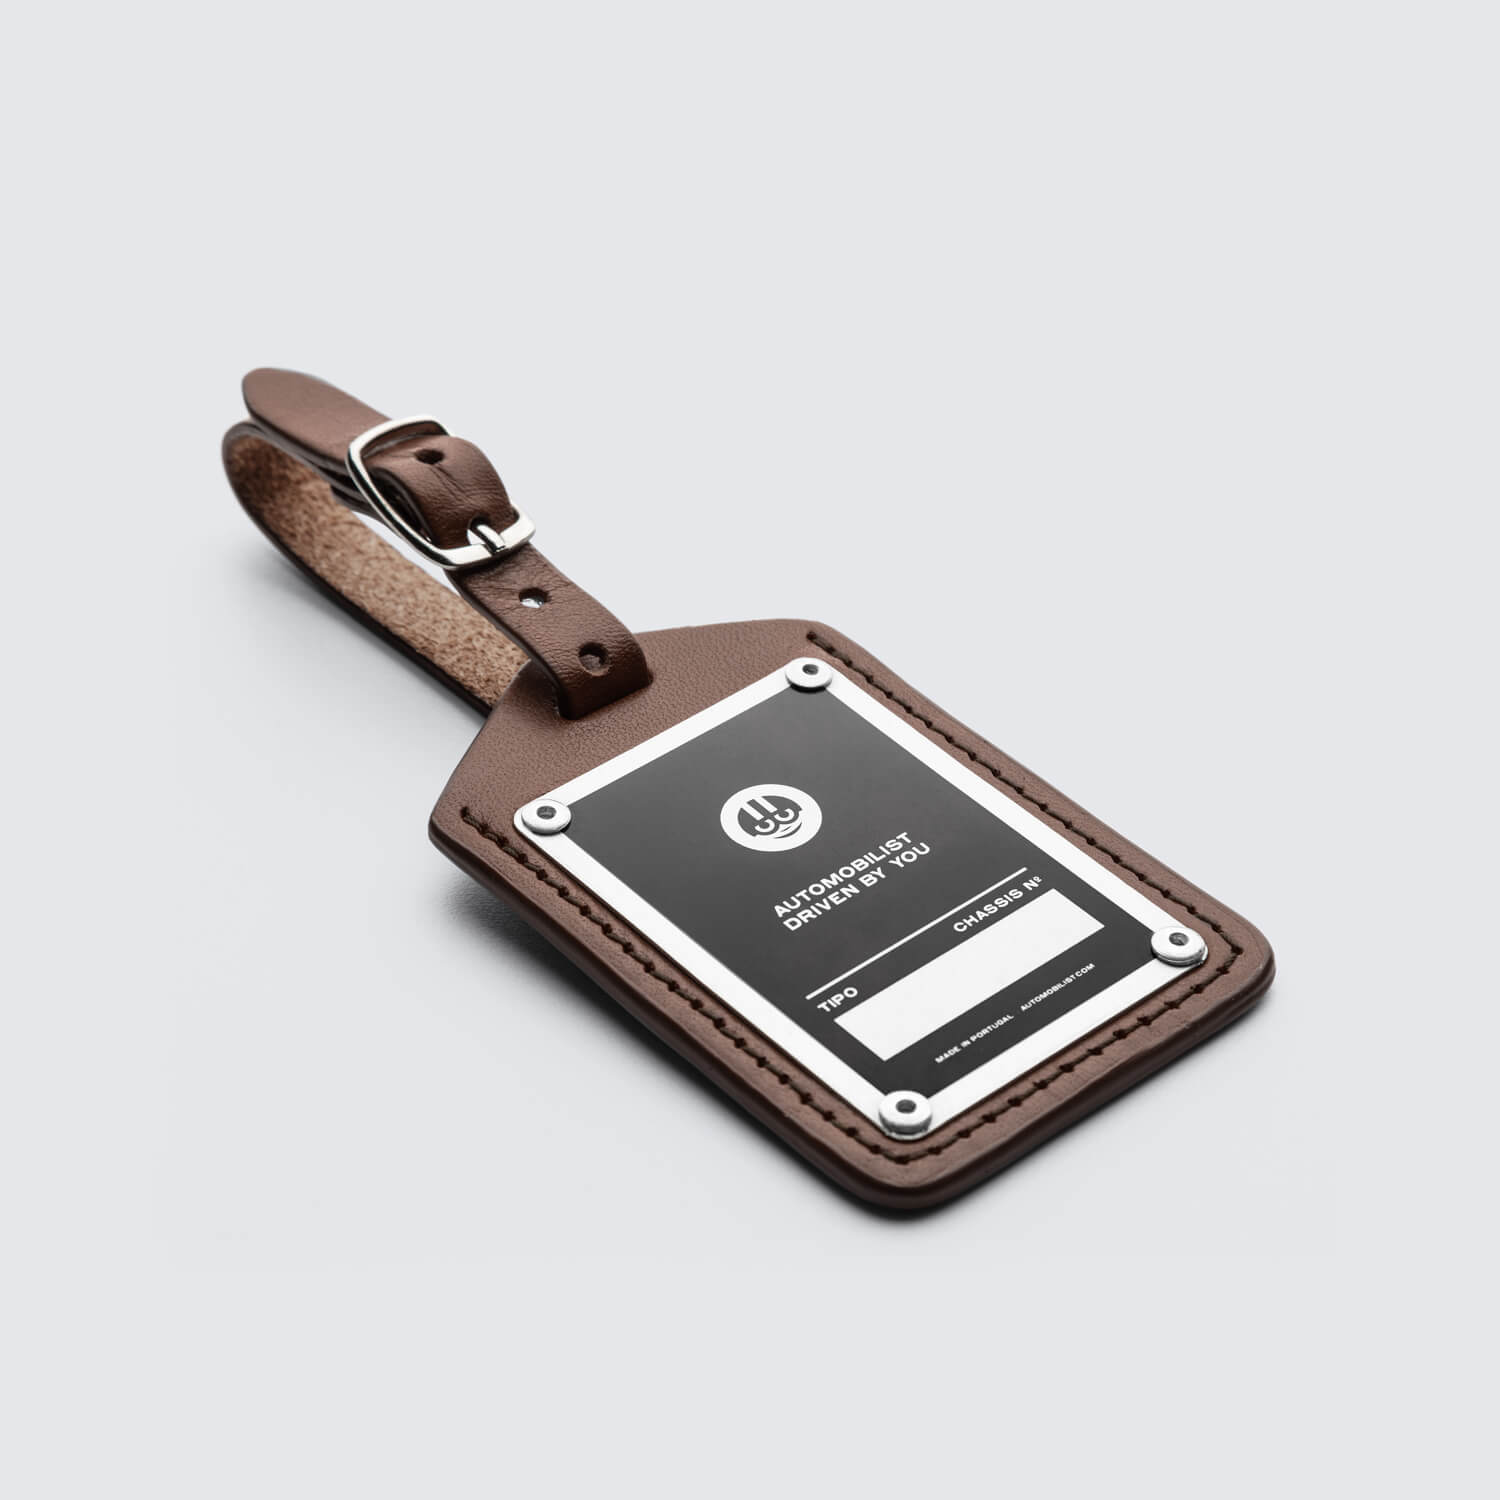 Leather Tag - Automobilist - Brown